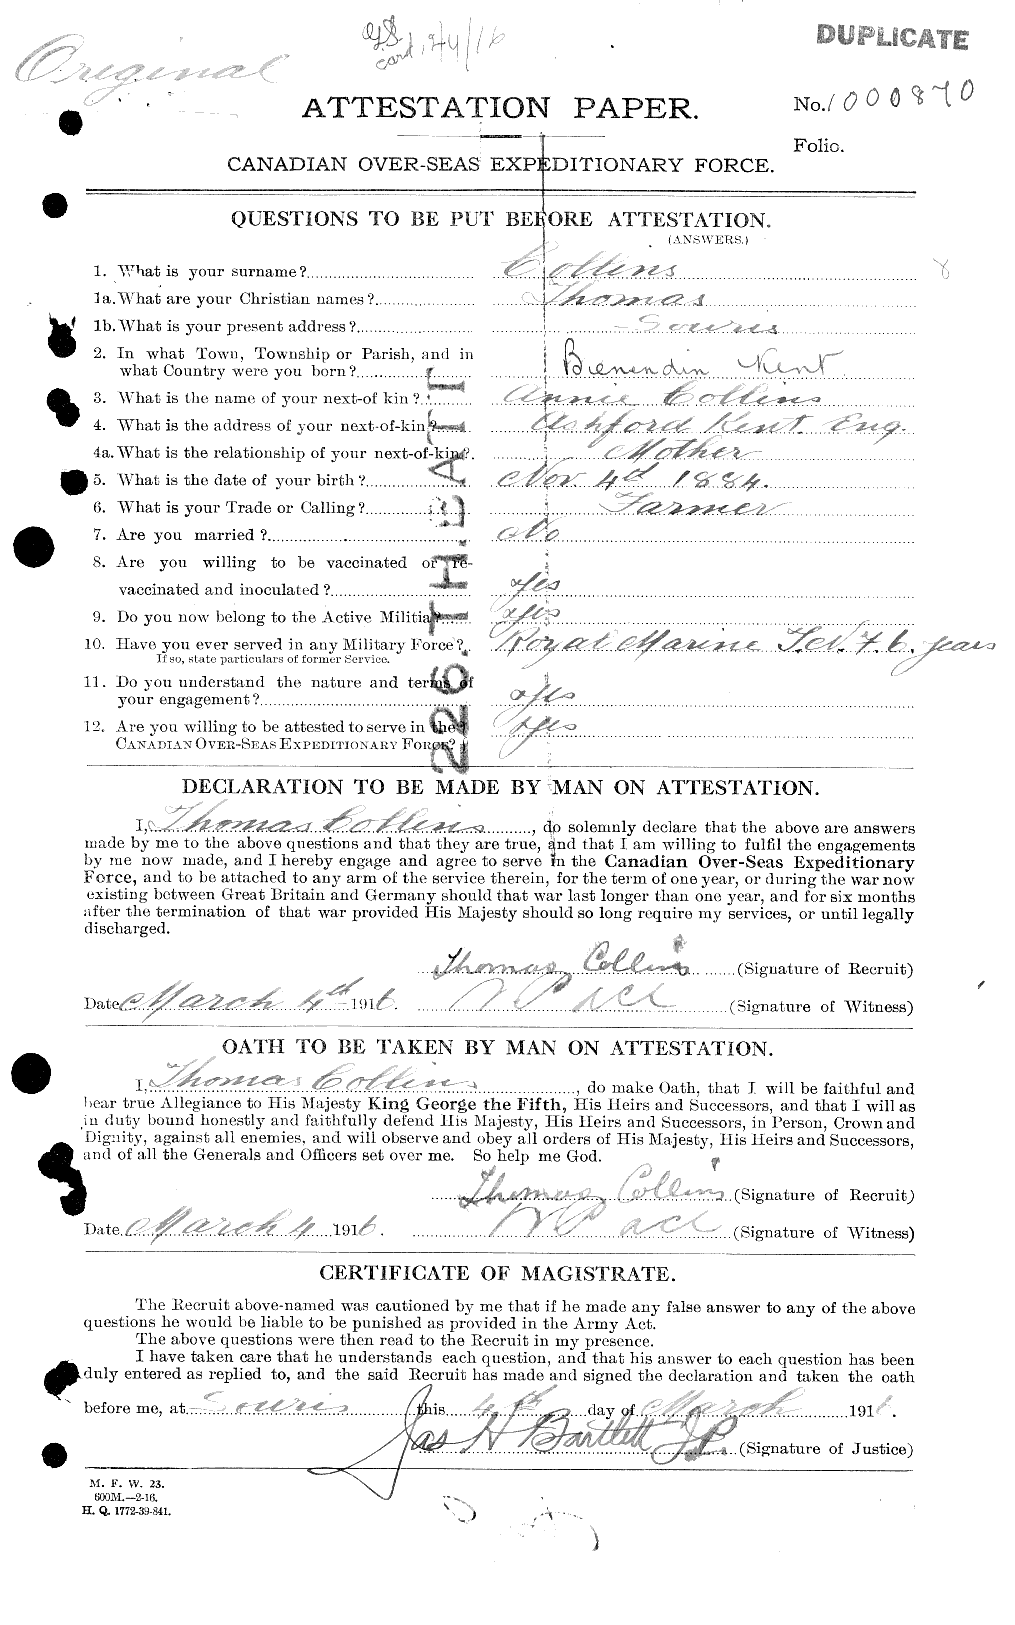 Personnel Records of the First World War - CEF 034568a